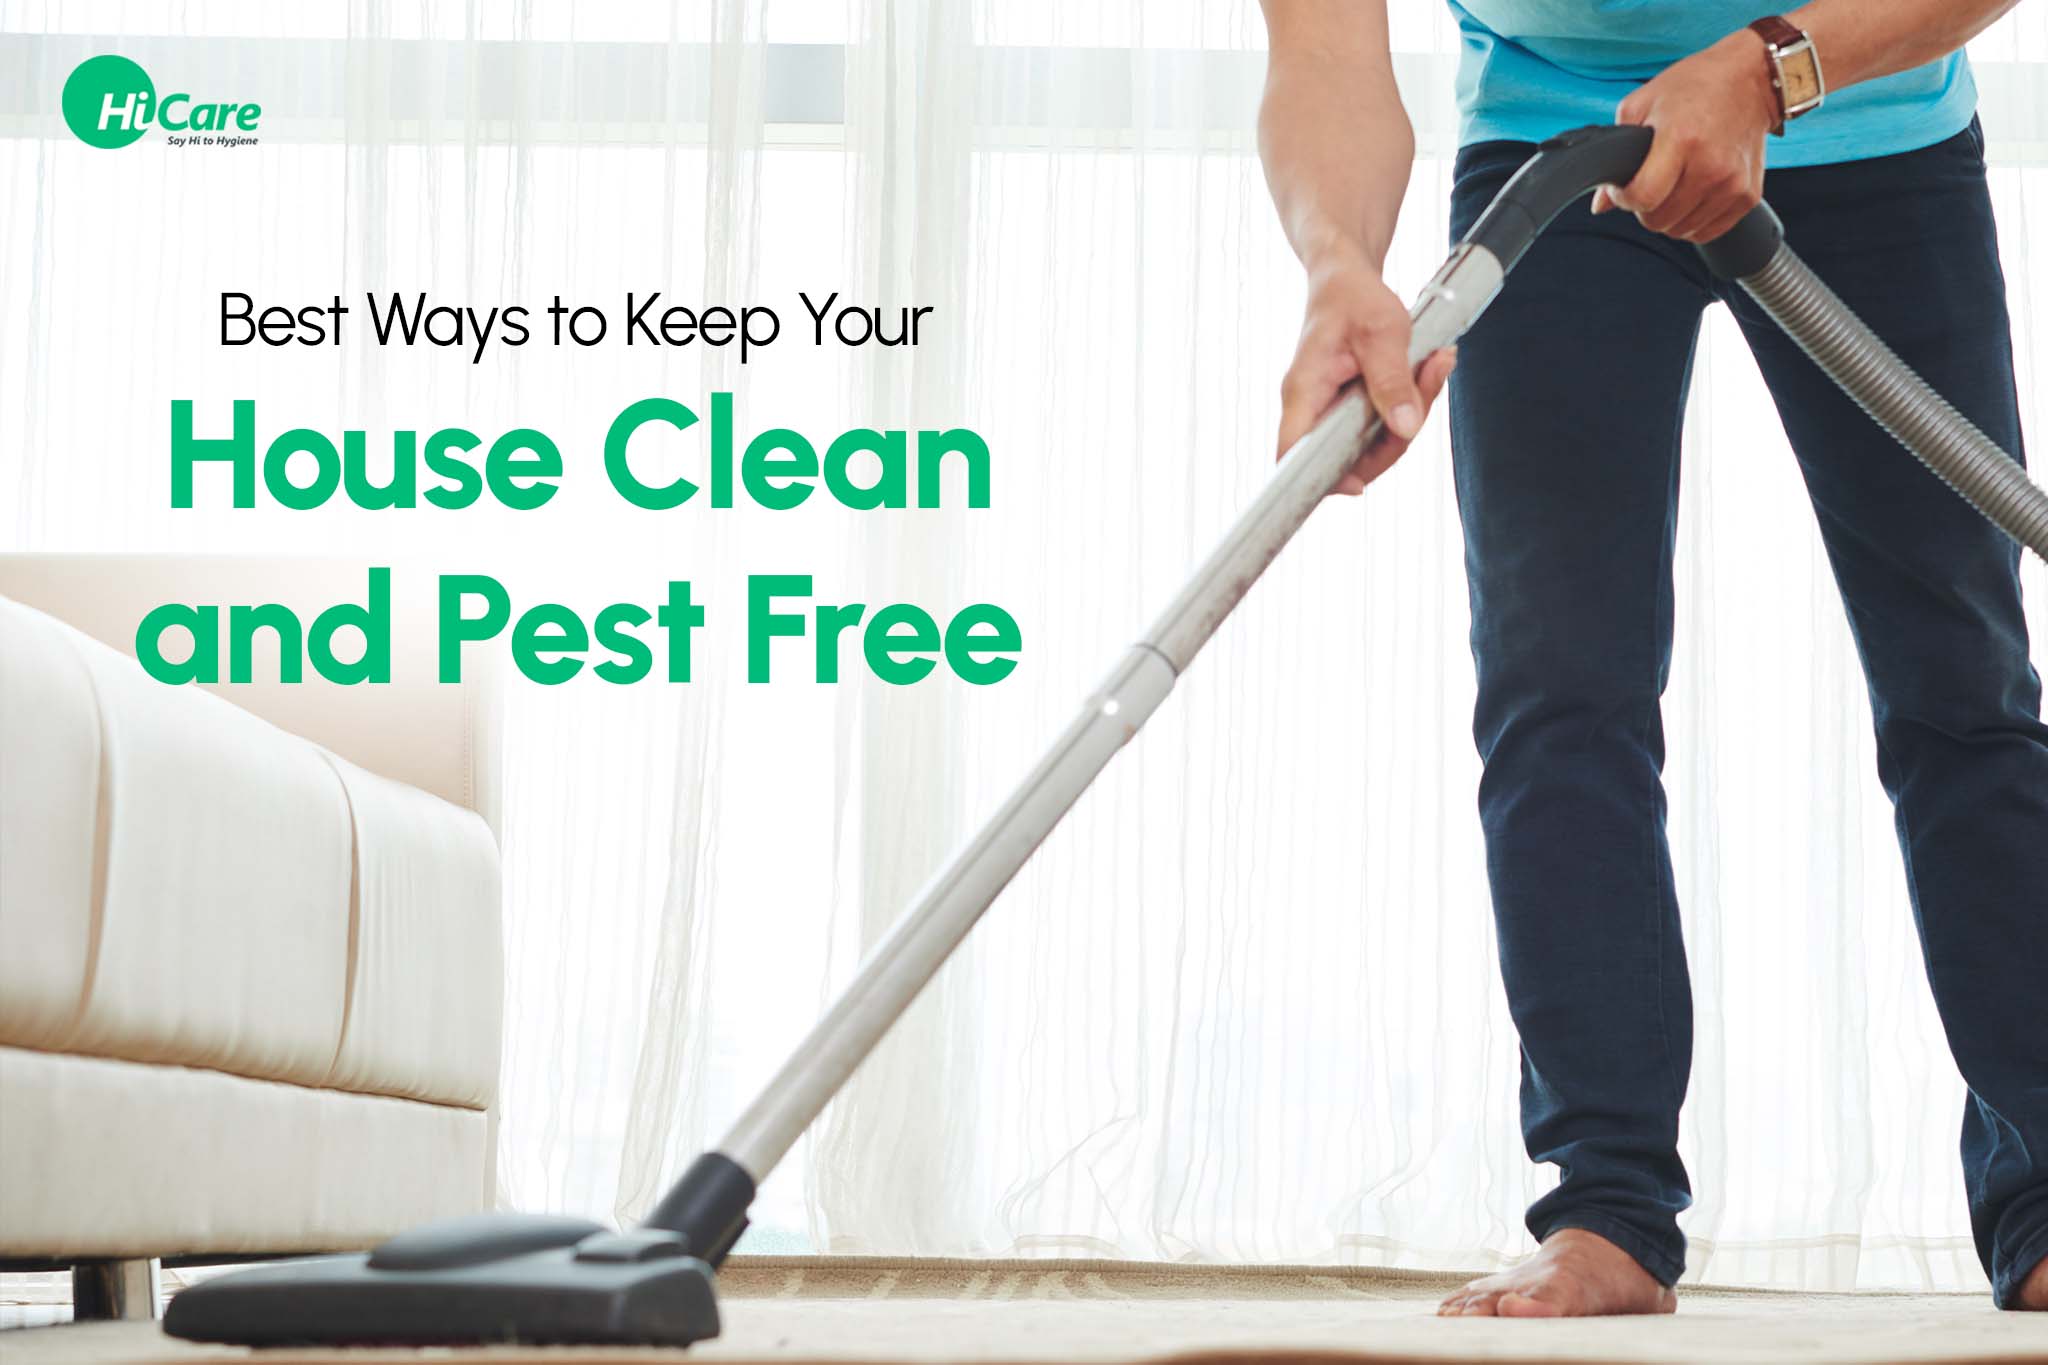 Best Ways to Keep Your House Clean and Pest Free